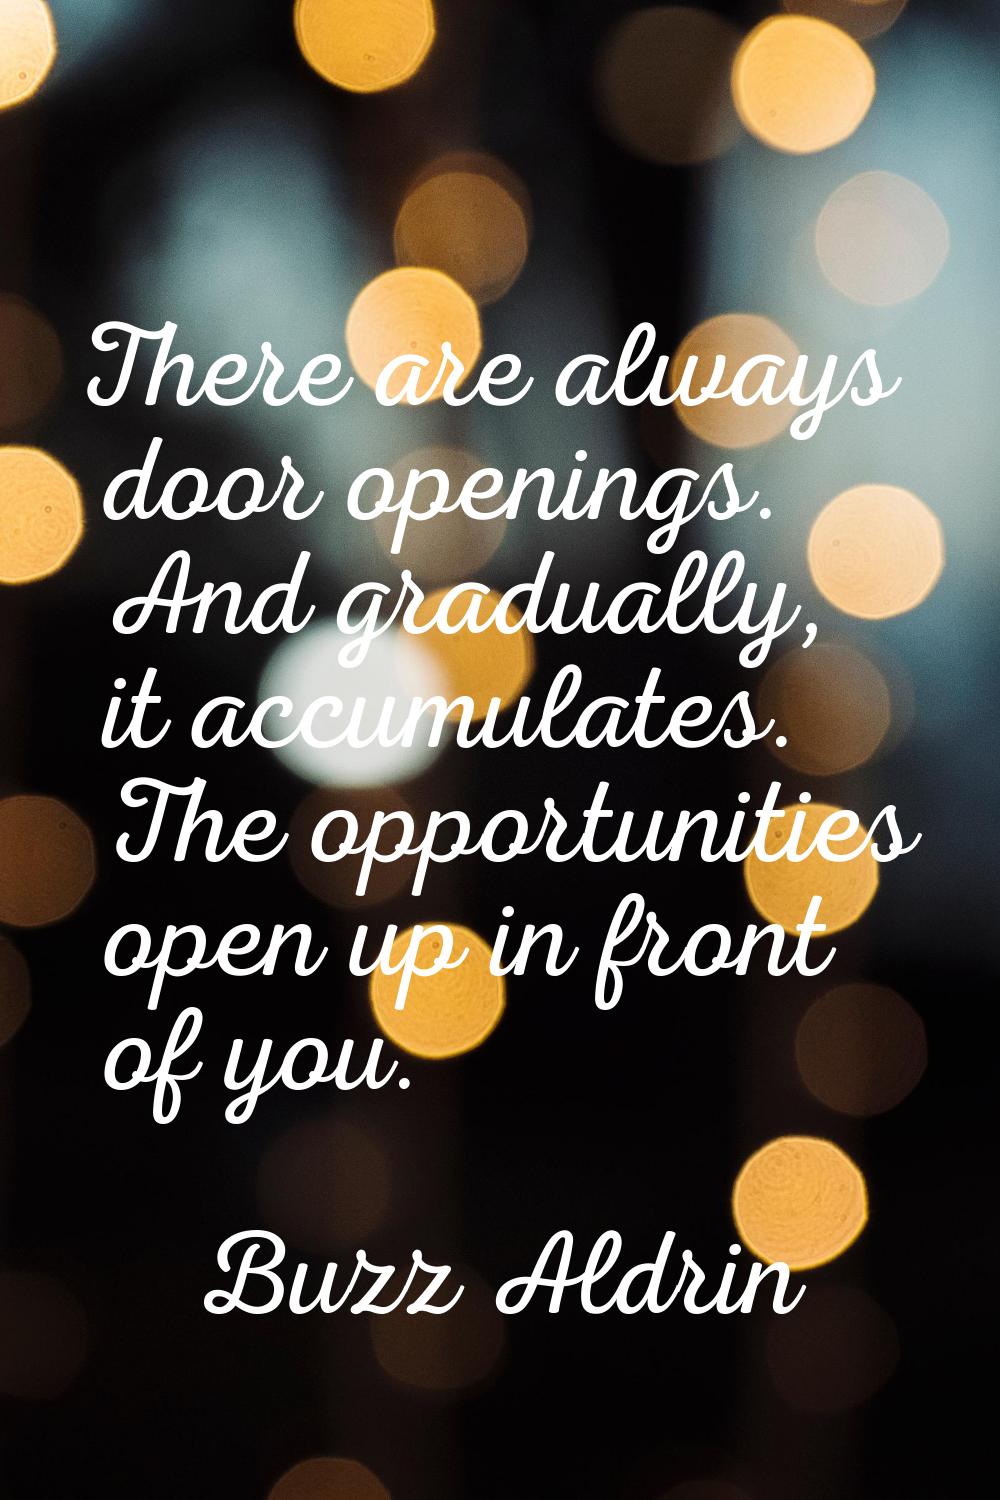 There are always door openings. And gradually, it accumulates. The opportunities open up in front o